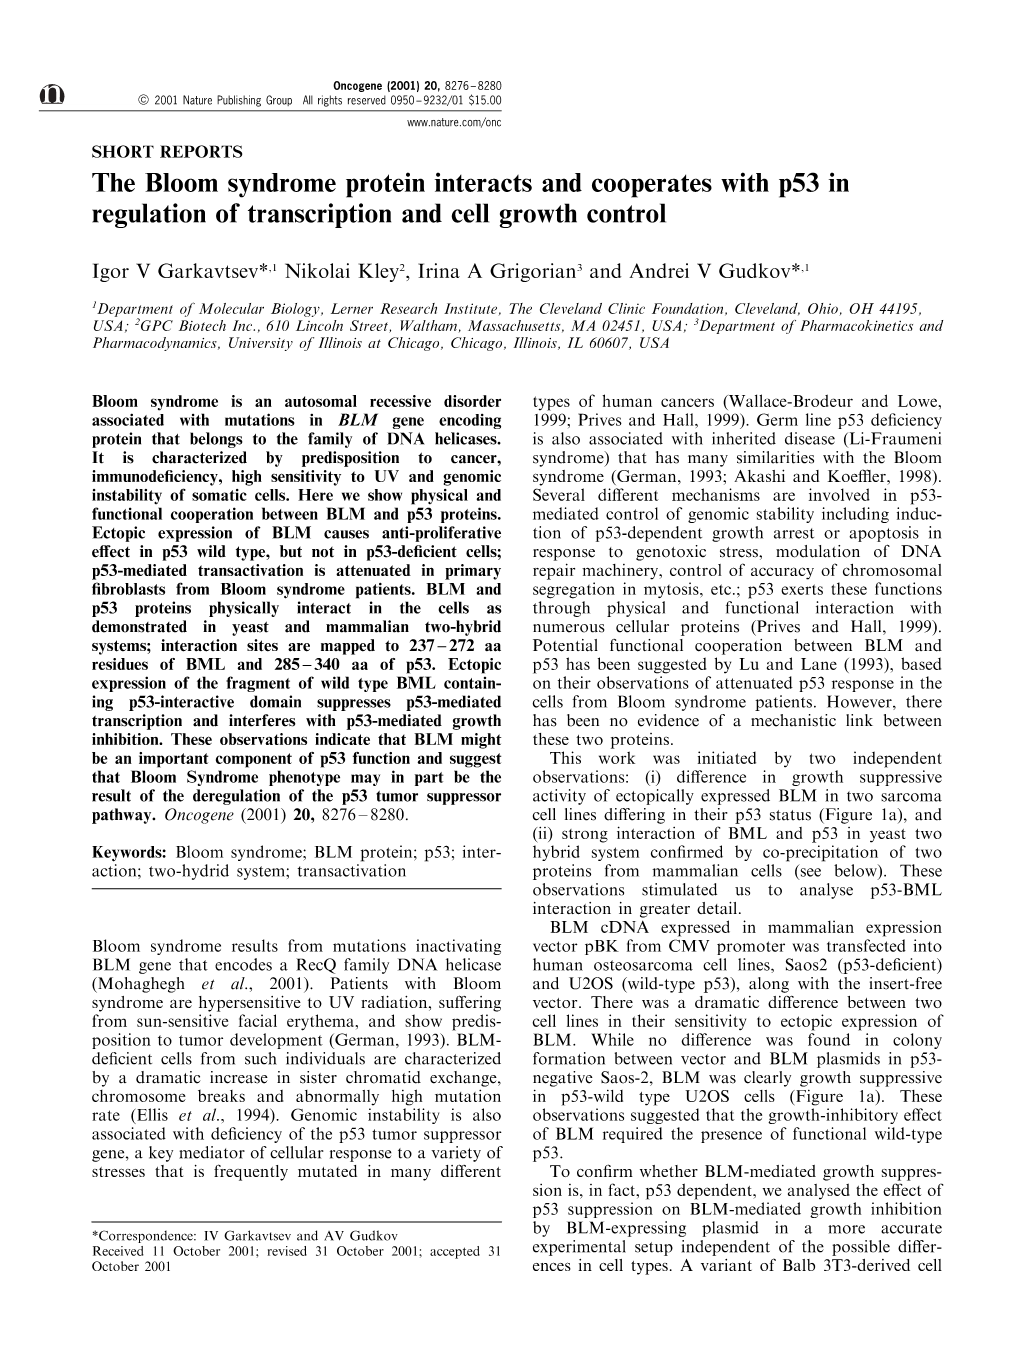 The Bloom Syndrome Protein Interacts and Cooperates with P53 in Regulation of Transcription and Cell Growth Control